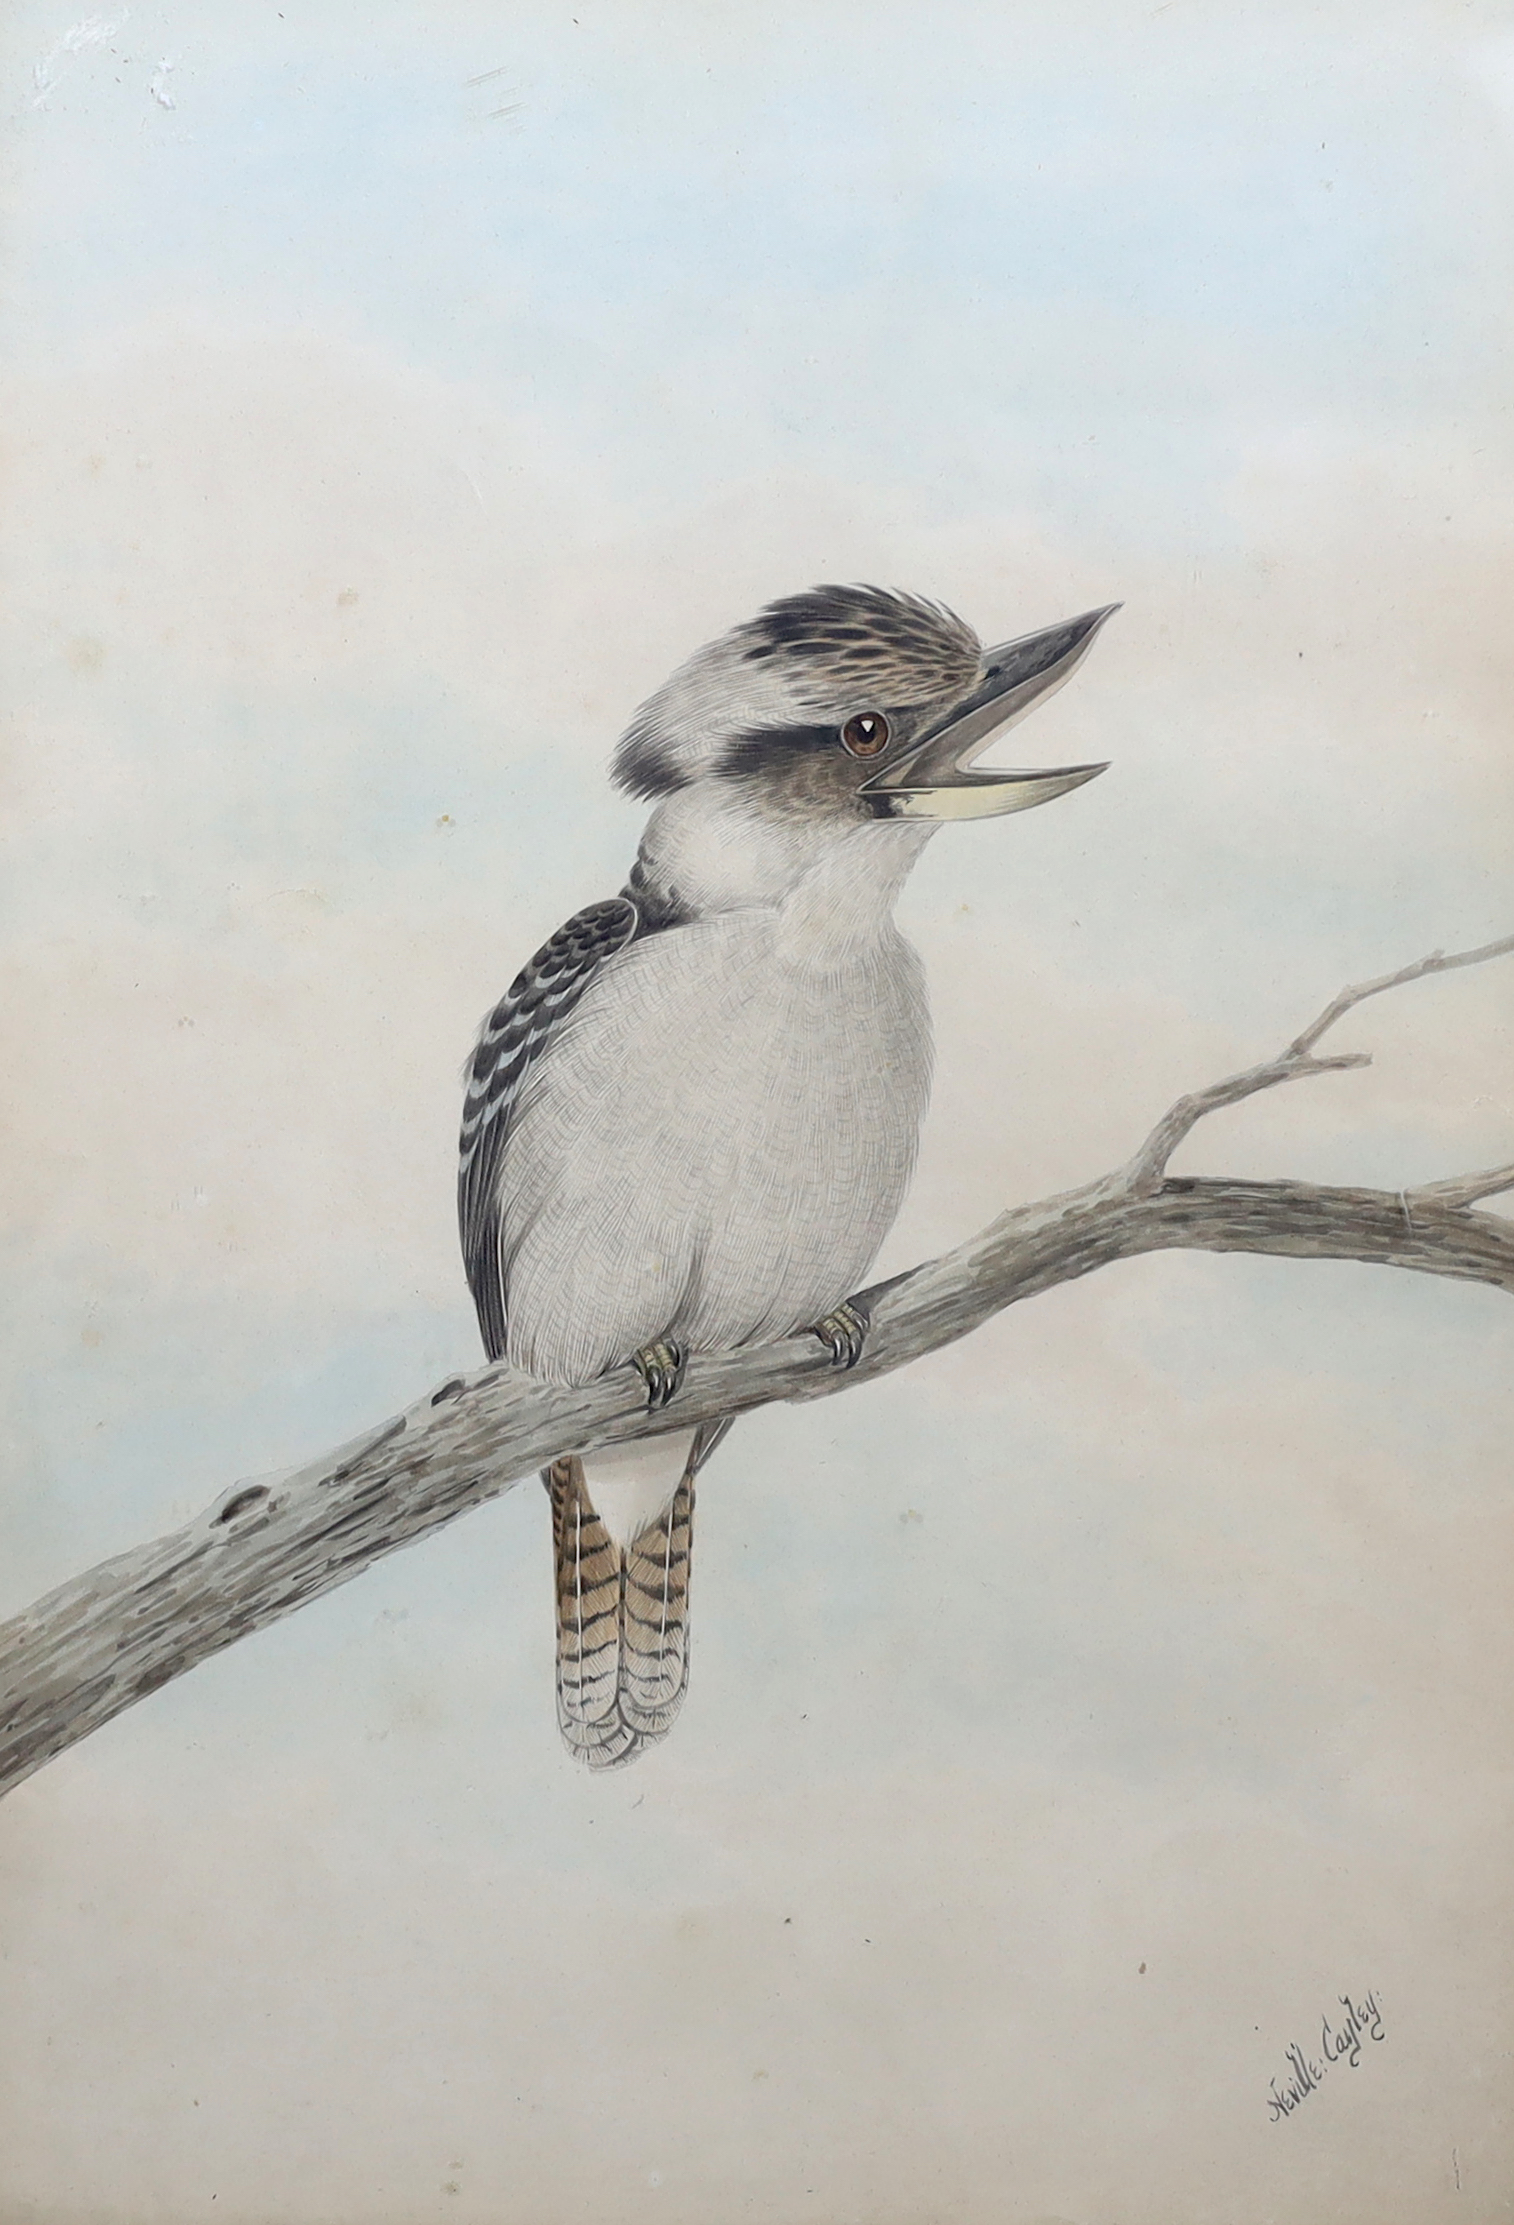 Neville William Cayley (Australian, 1886-1950), Study of a Cookaburra on a branch, watercolour, 56 x 39.5cm